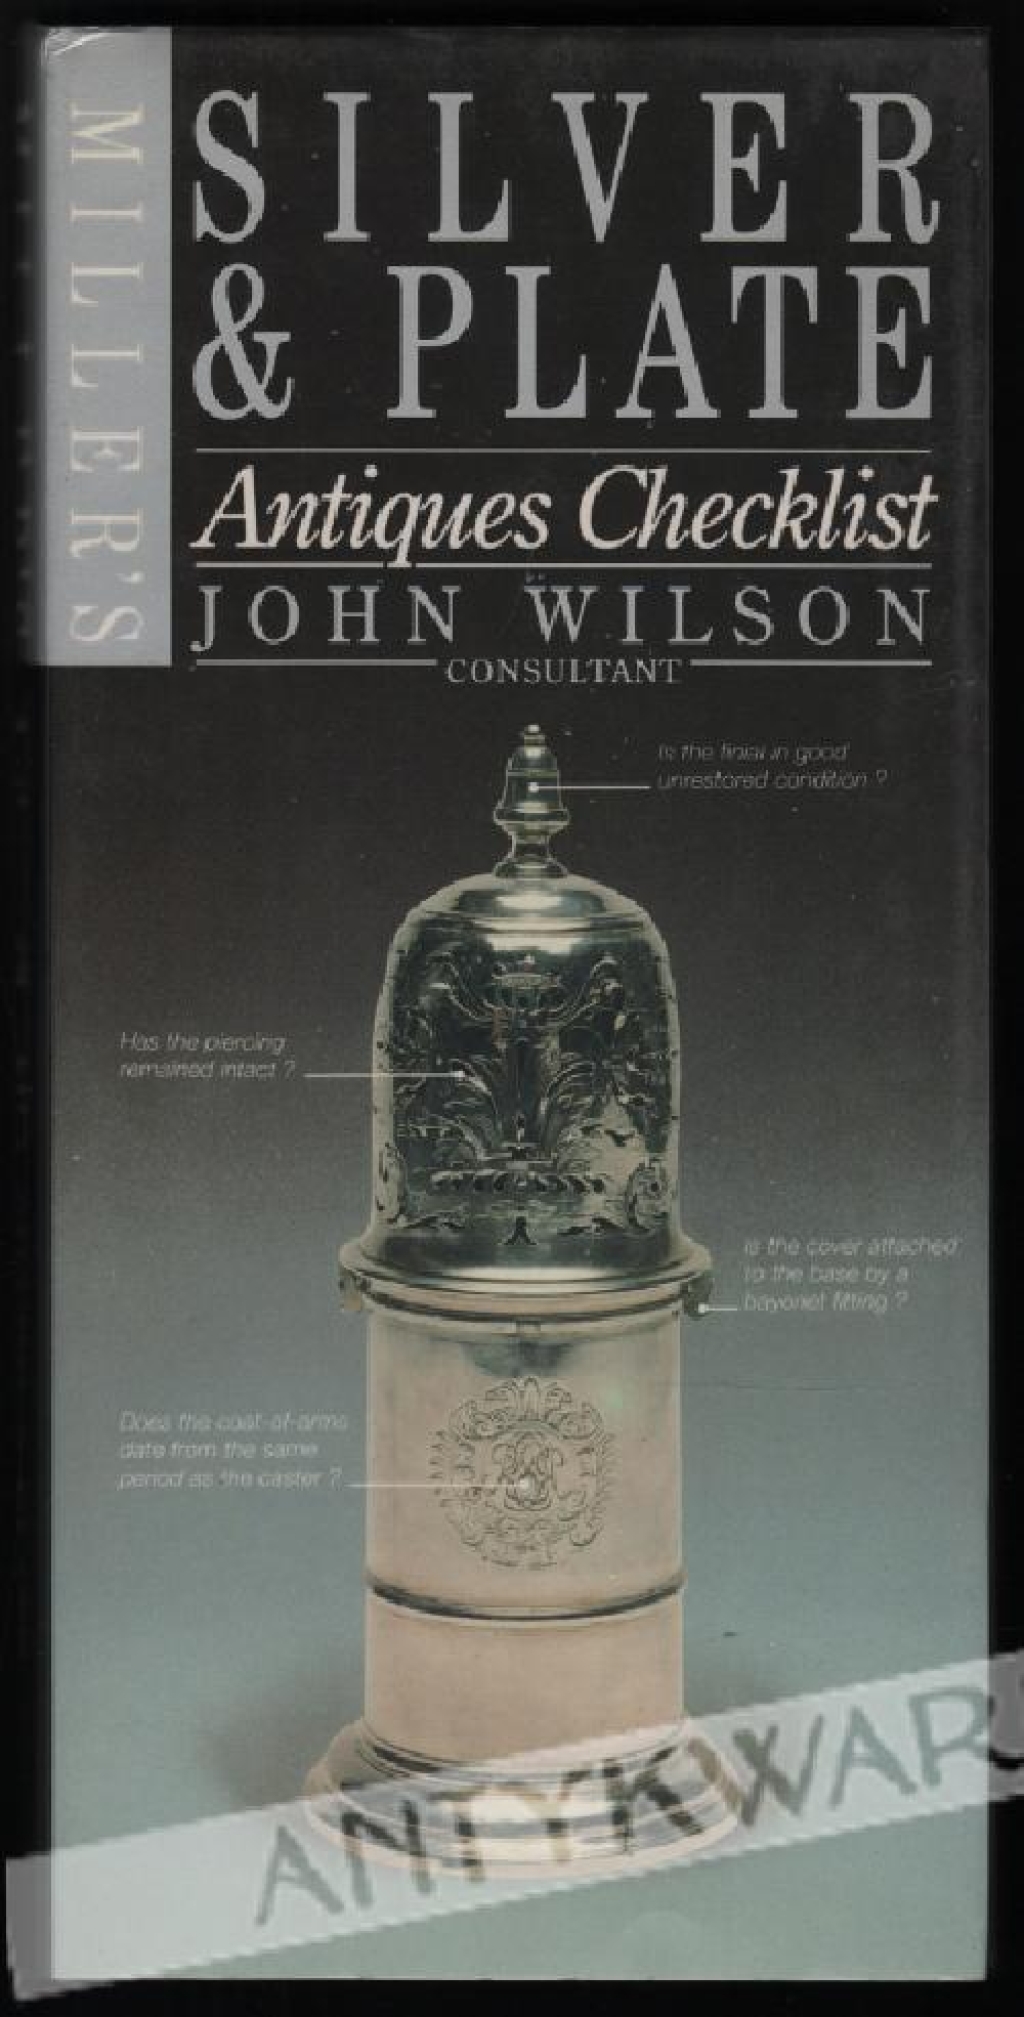 Miller's Silver & Plate Antiques Checklist